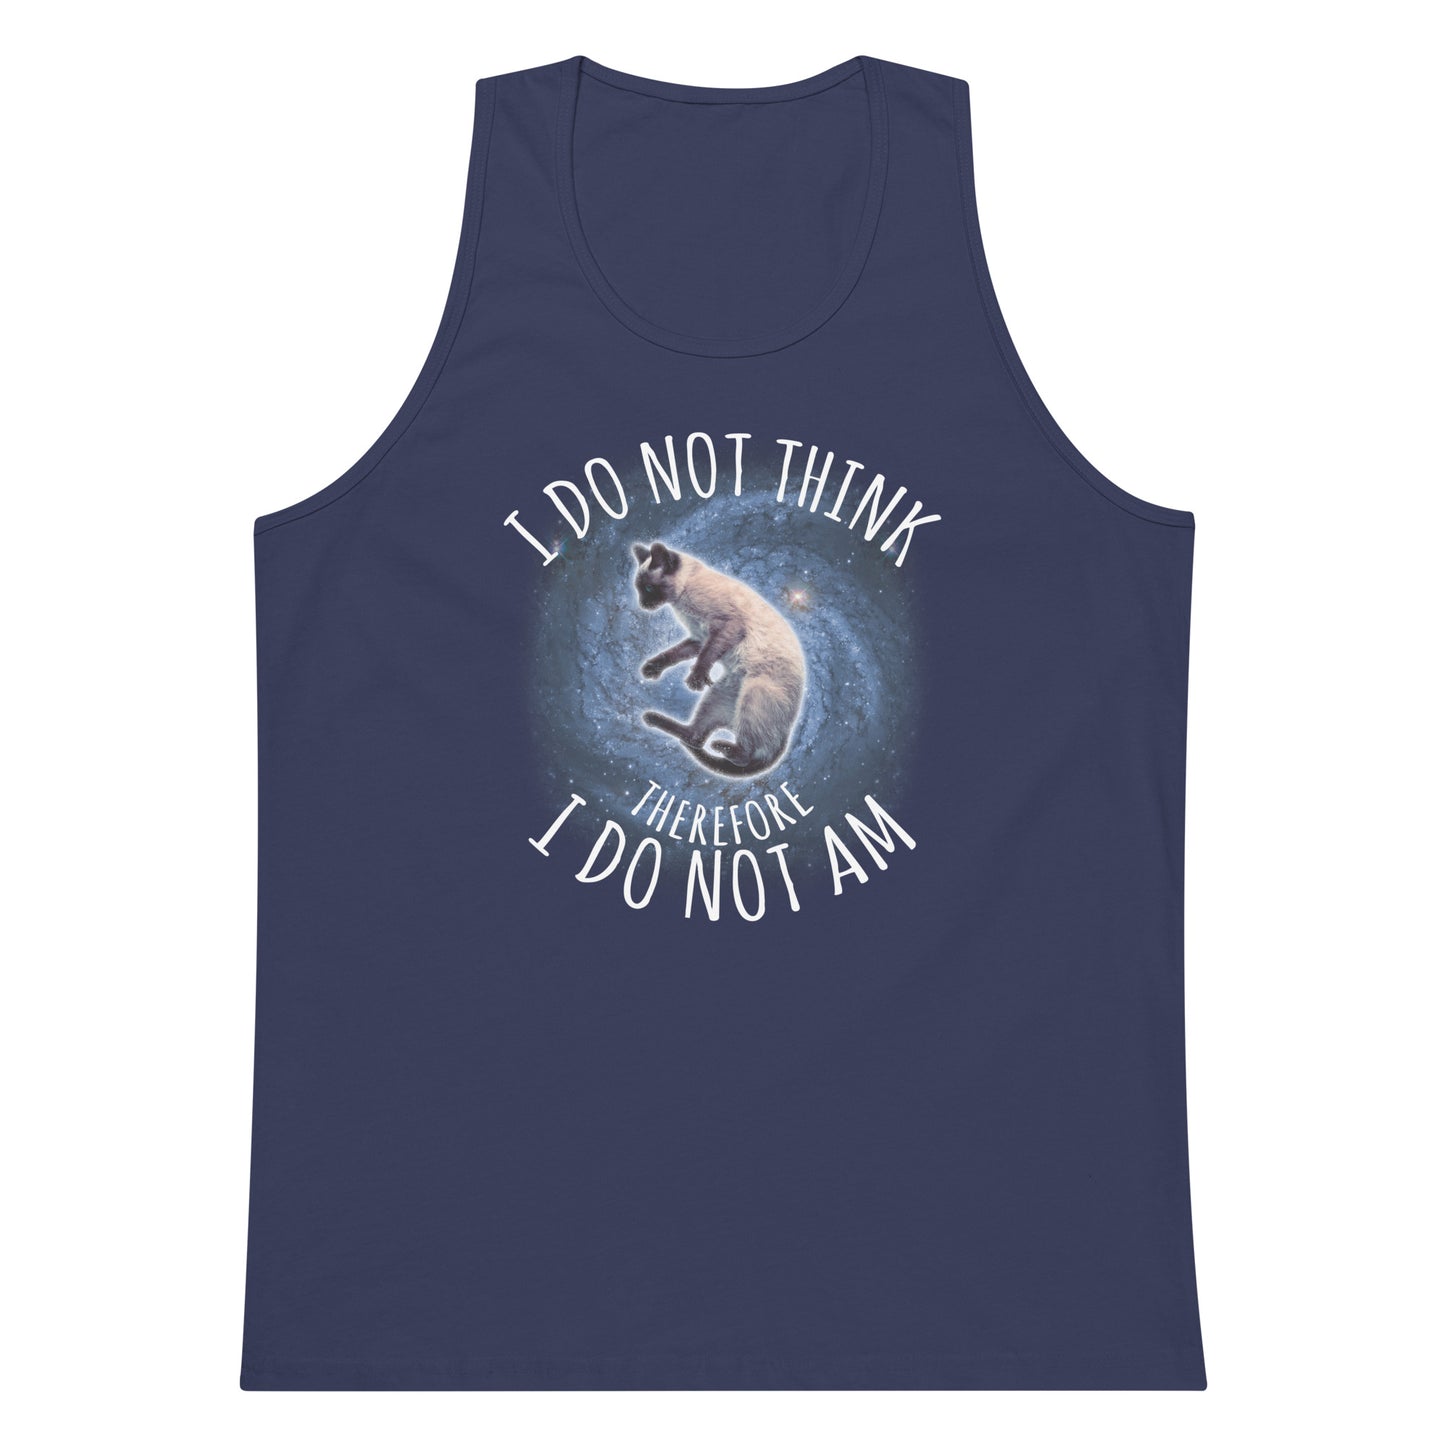 I Do Not Think Therefore I Do Not Am tank top